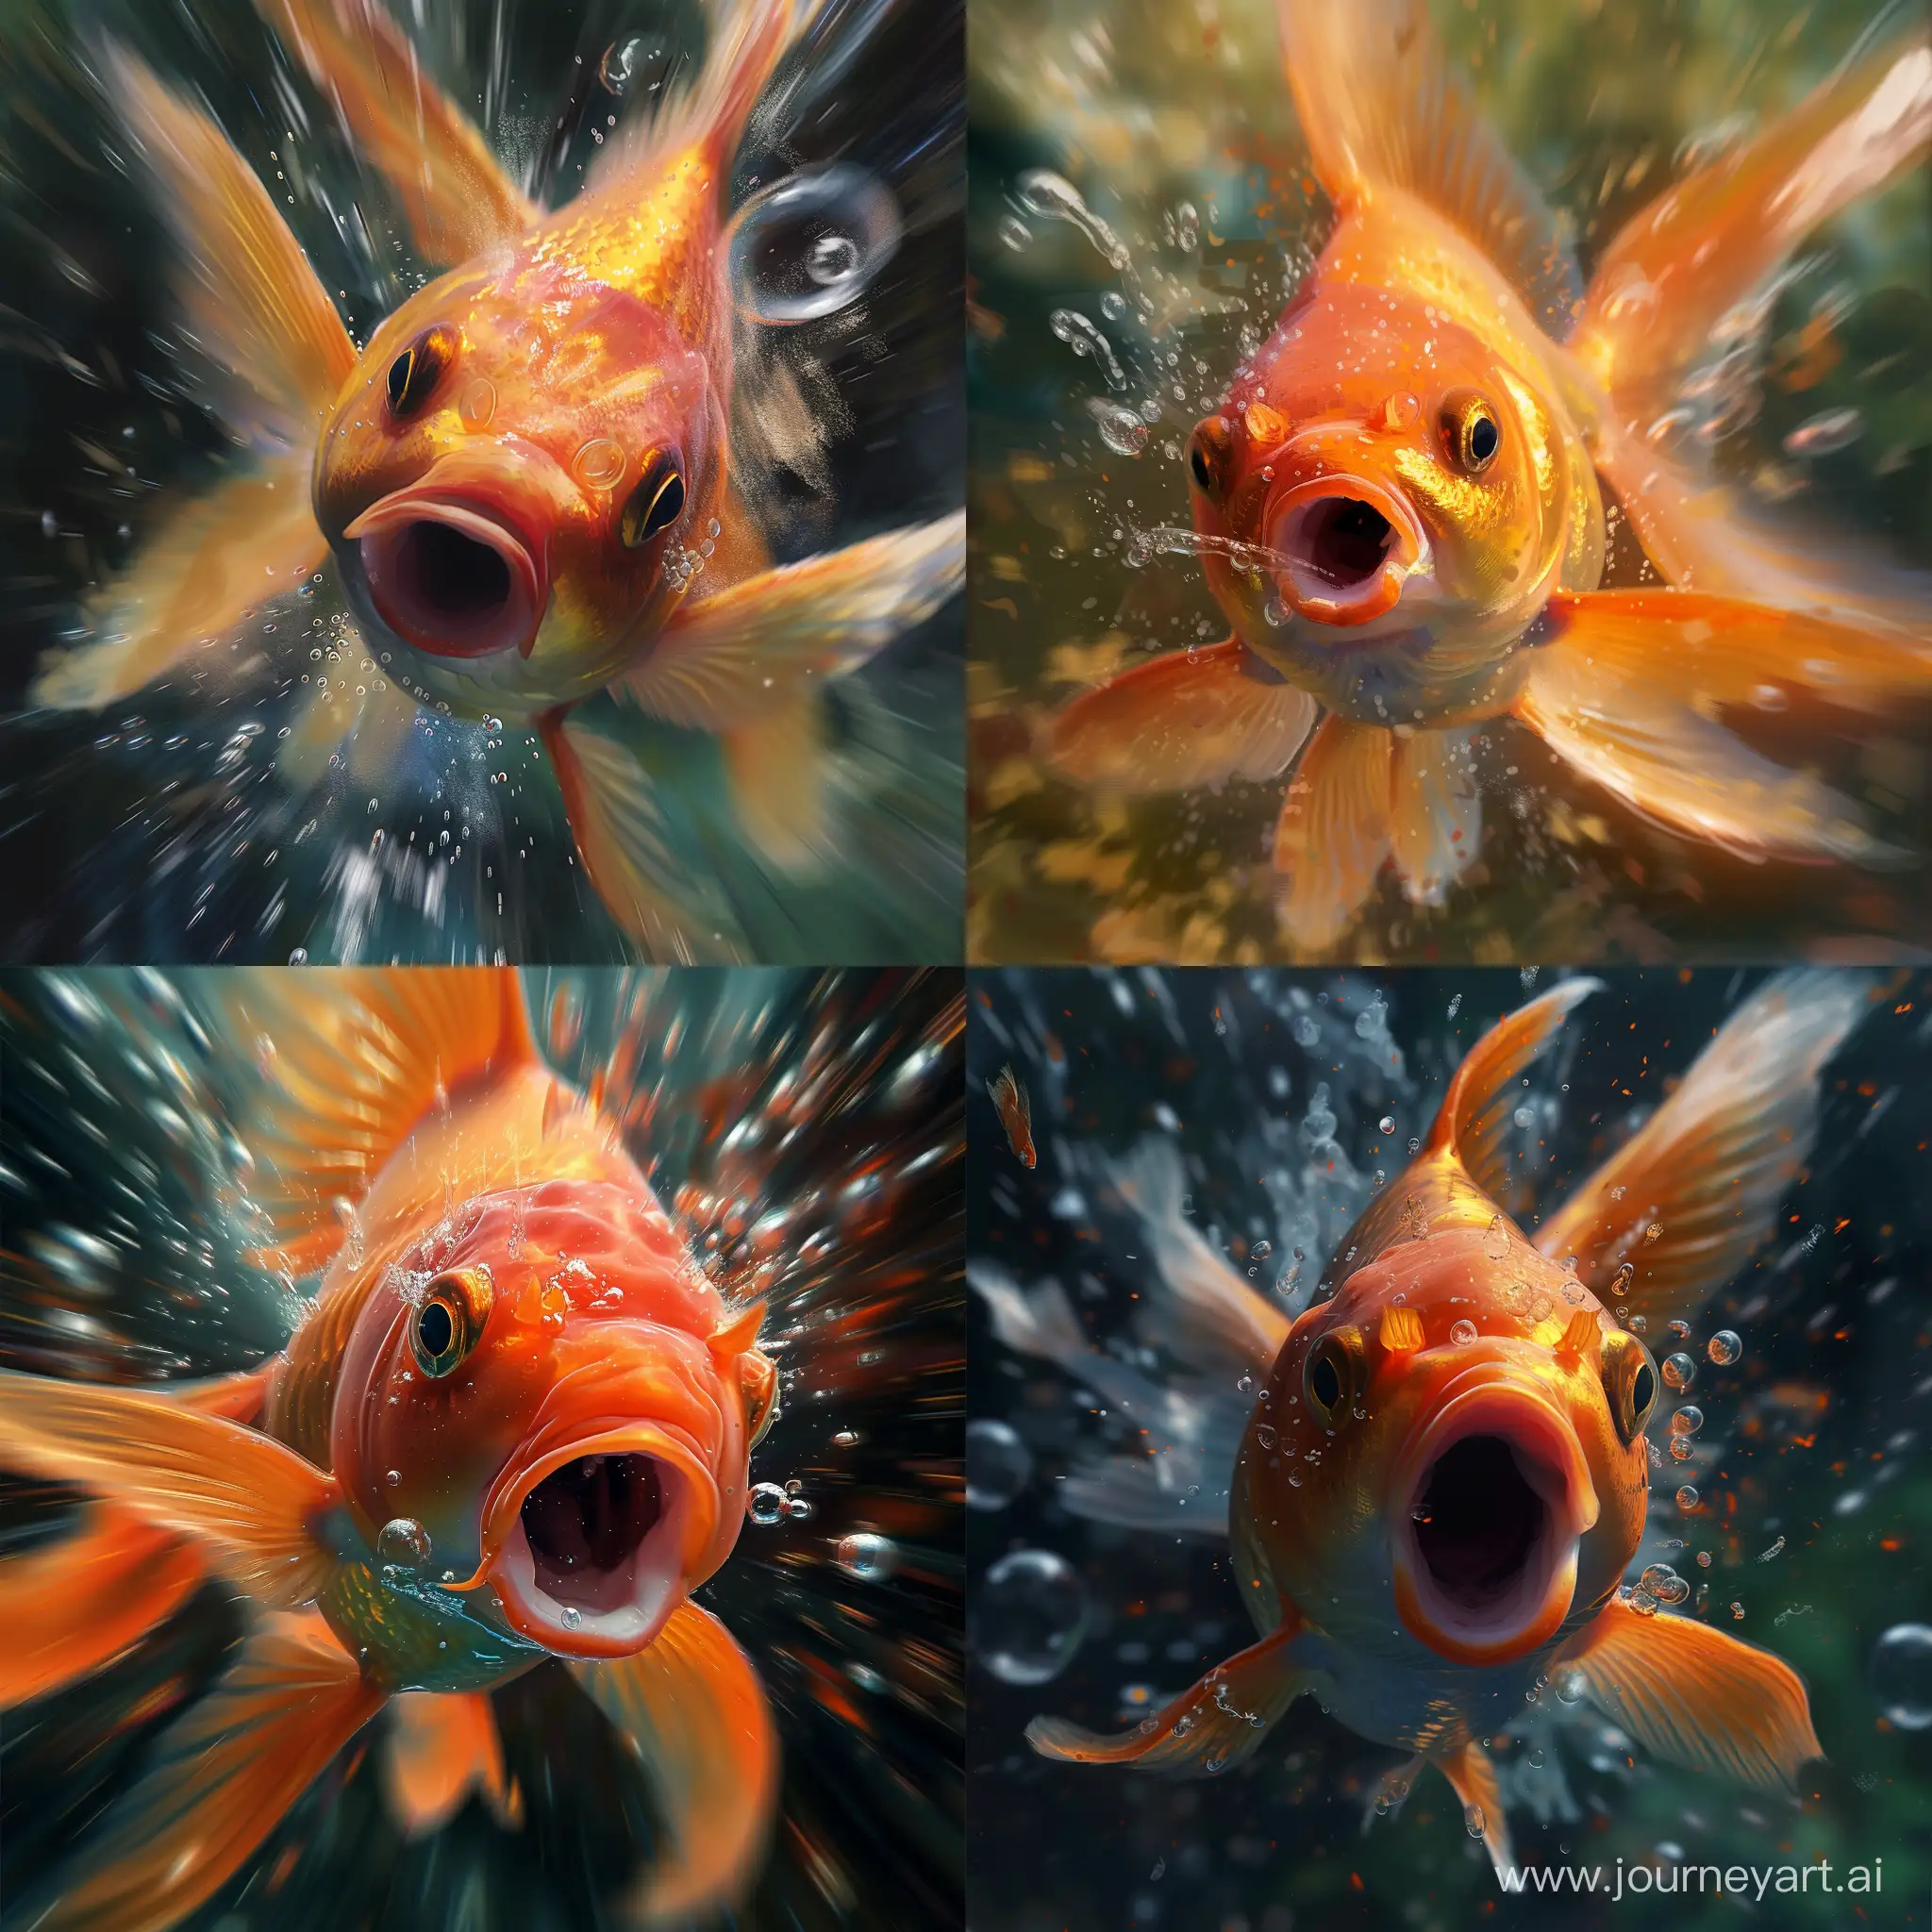 Ferocious-Wild-Goldfish-in-HighSpeed-Charge